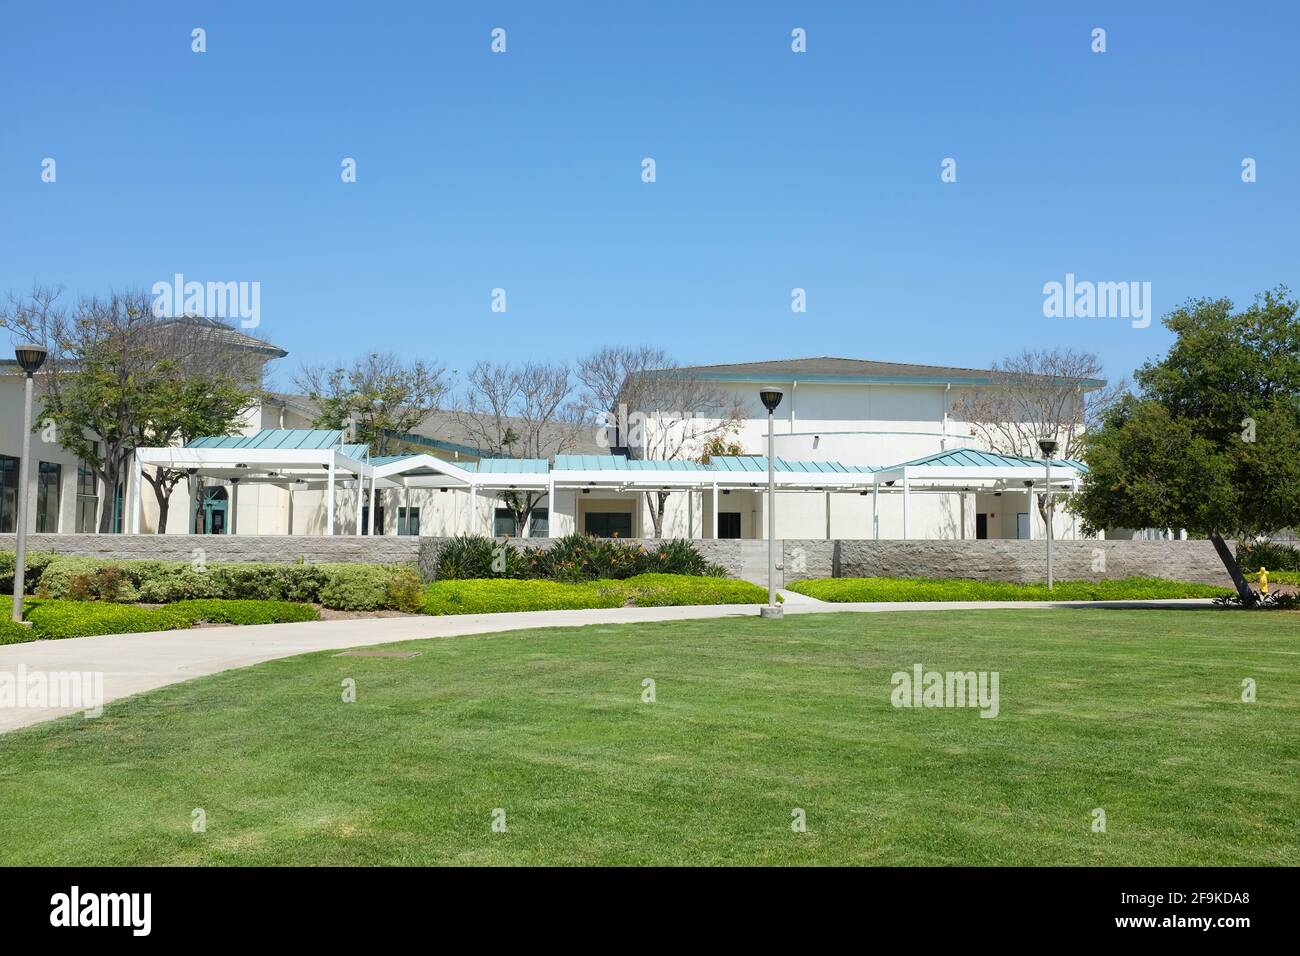 IRVINE, CALIFORNIA - 16 APR 2021: The Lakeview Senior Center at the Mike Ward Community Park. Stock Photo